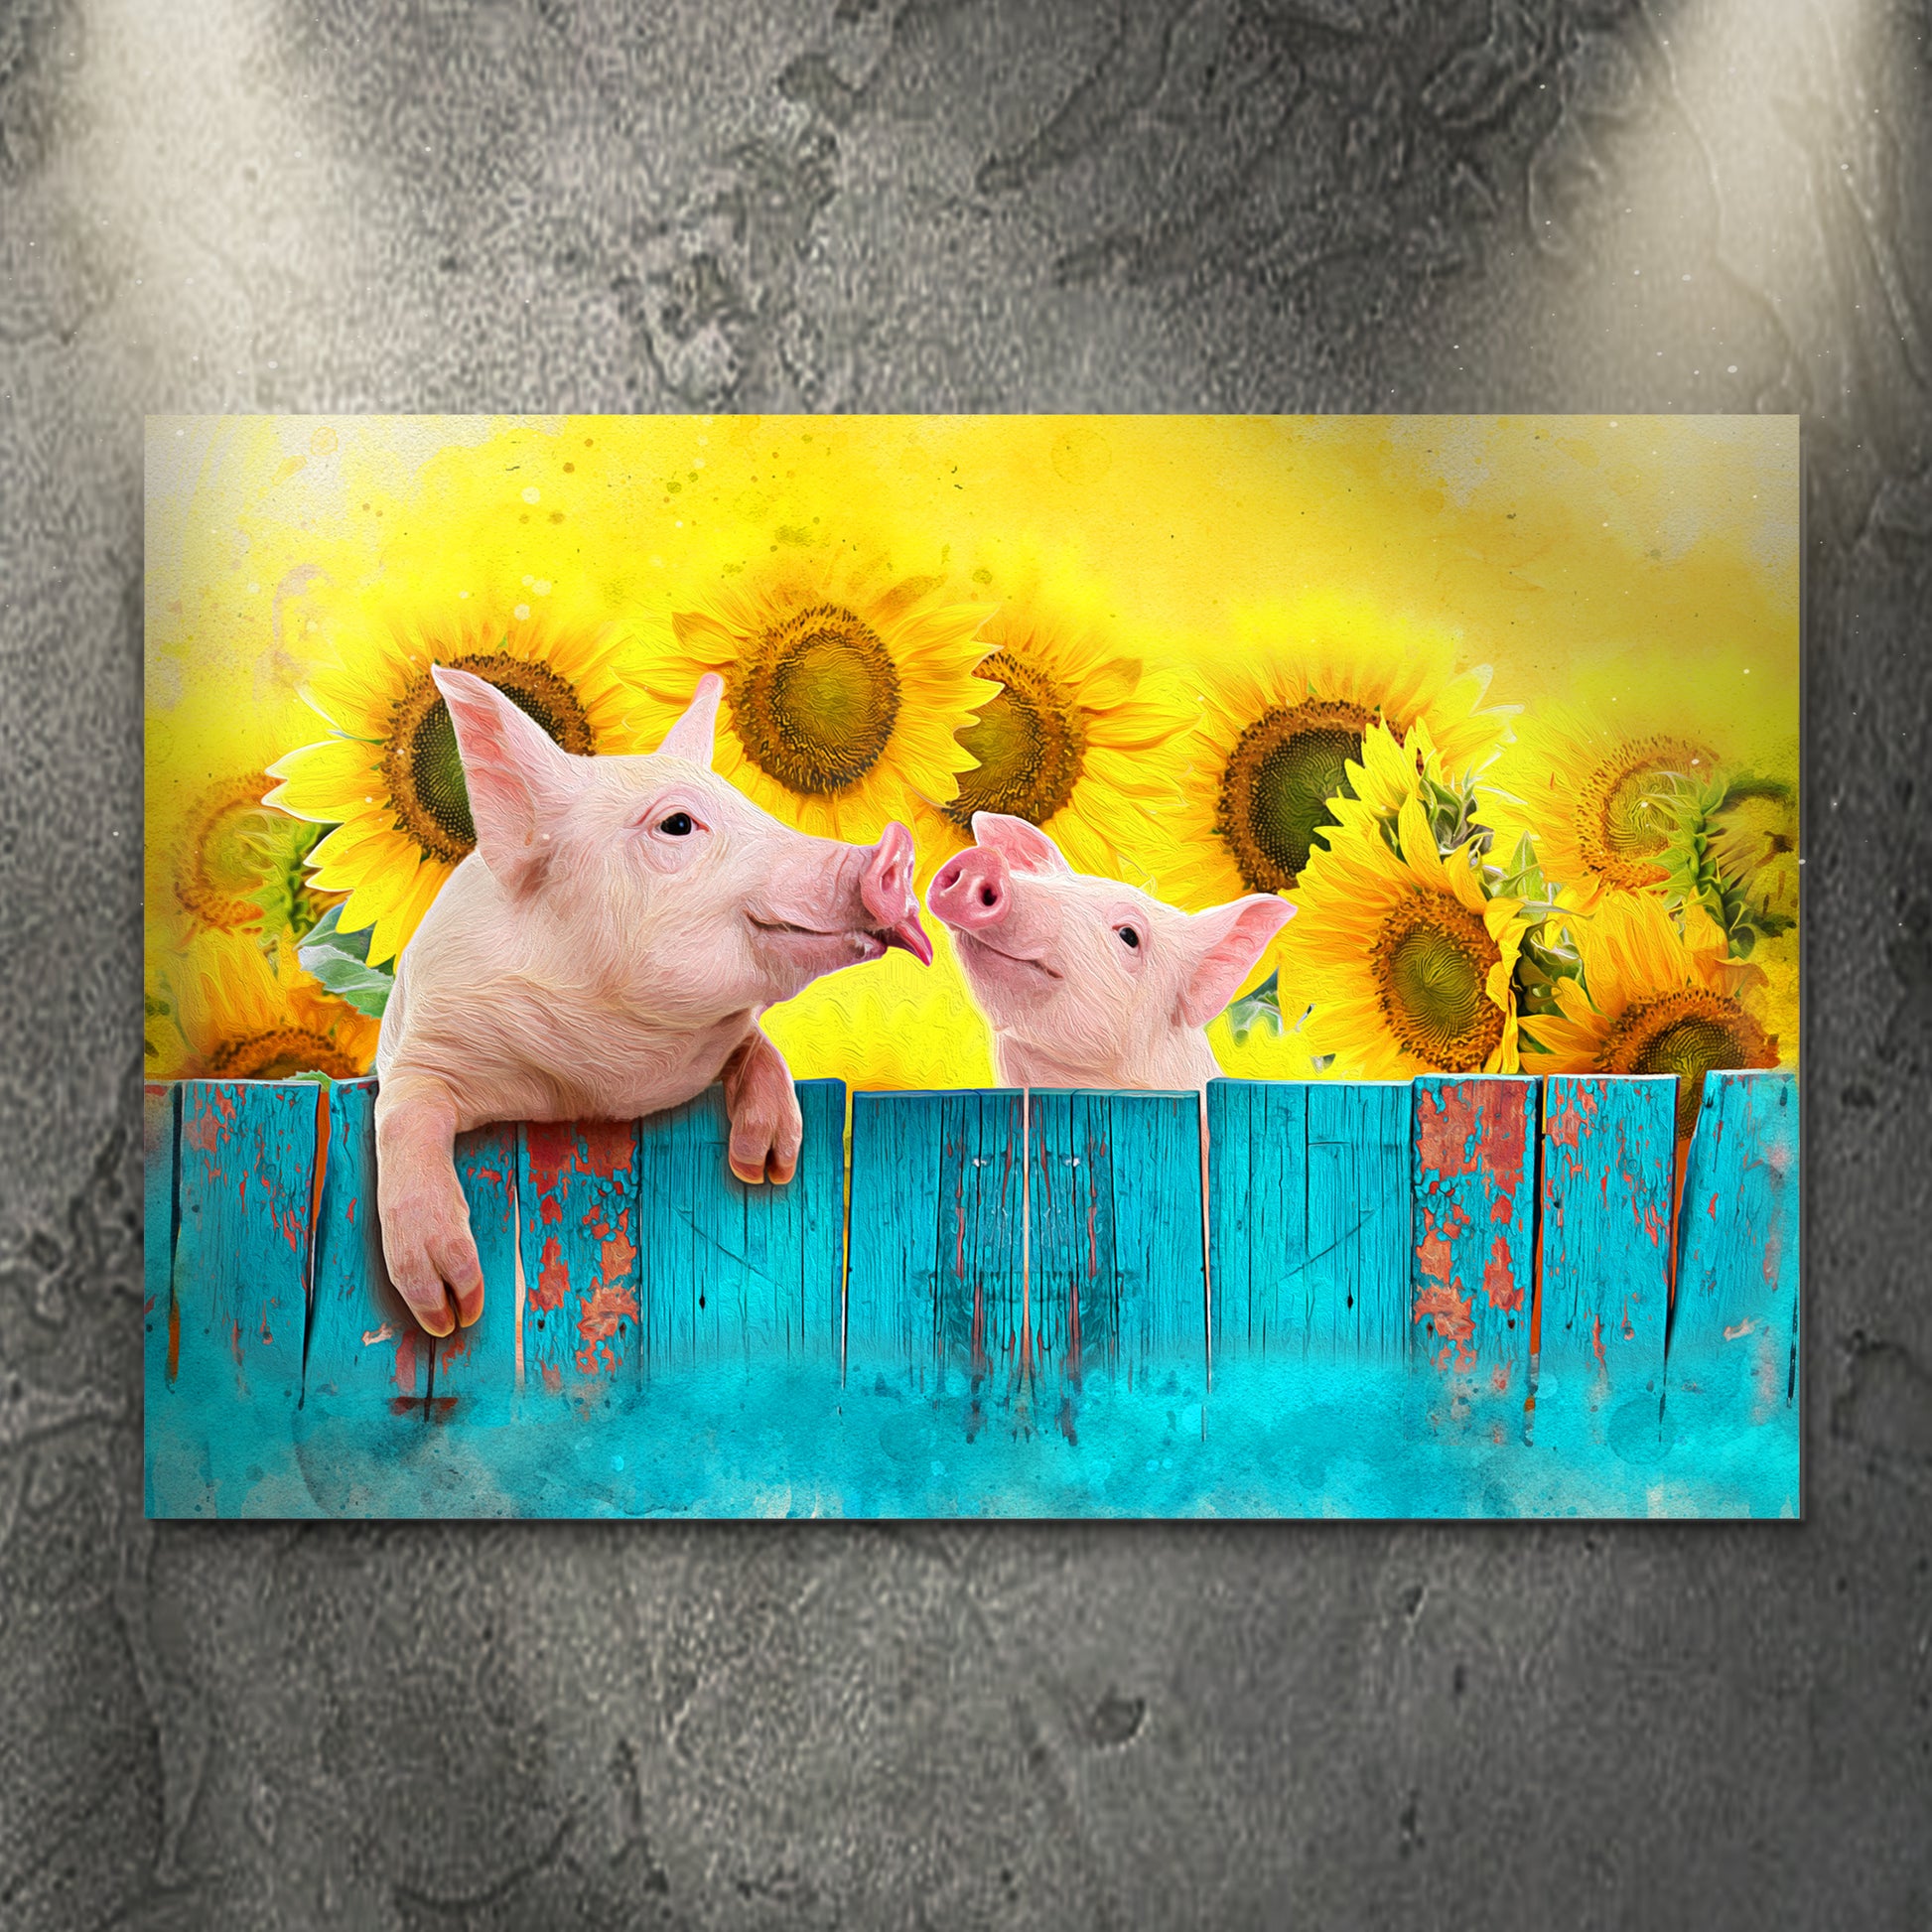 Sunflower Pigs Canvas Wall Art - Image by Tailored Canvases